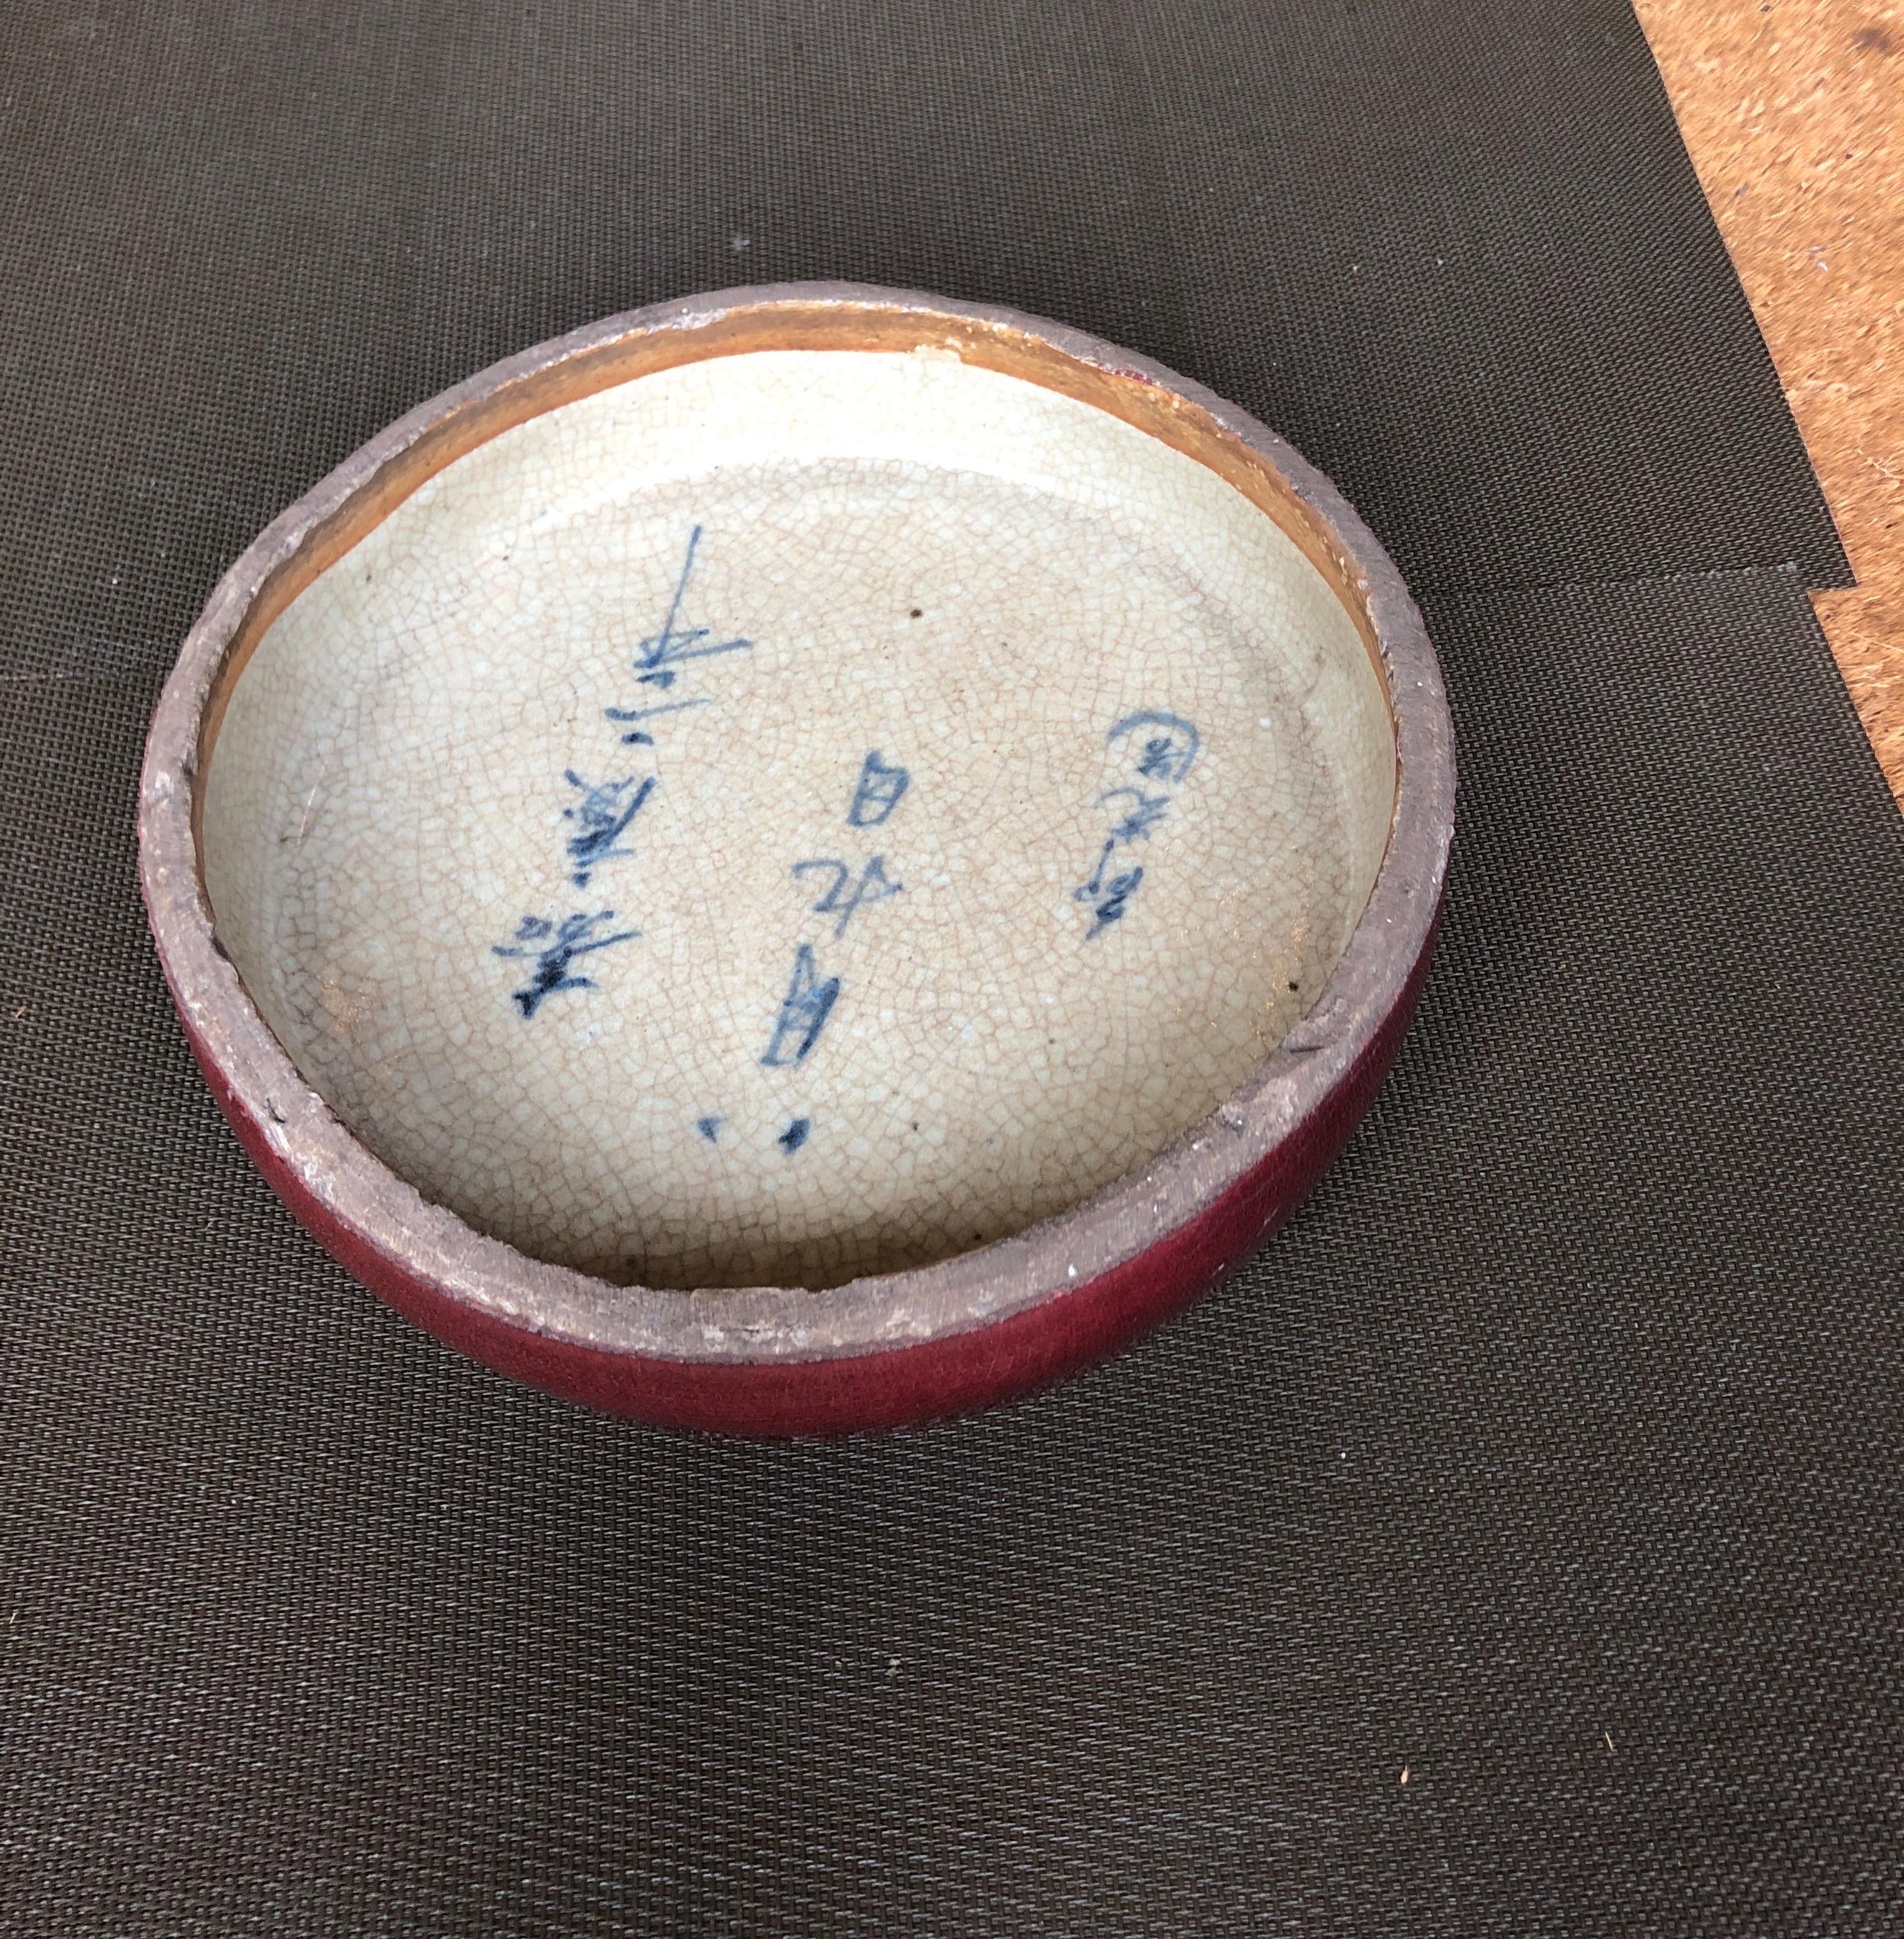 Antique Ceramic Brush Washer with Chinese Calligraphy and Striking Red Accent 3